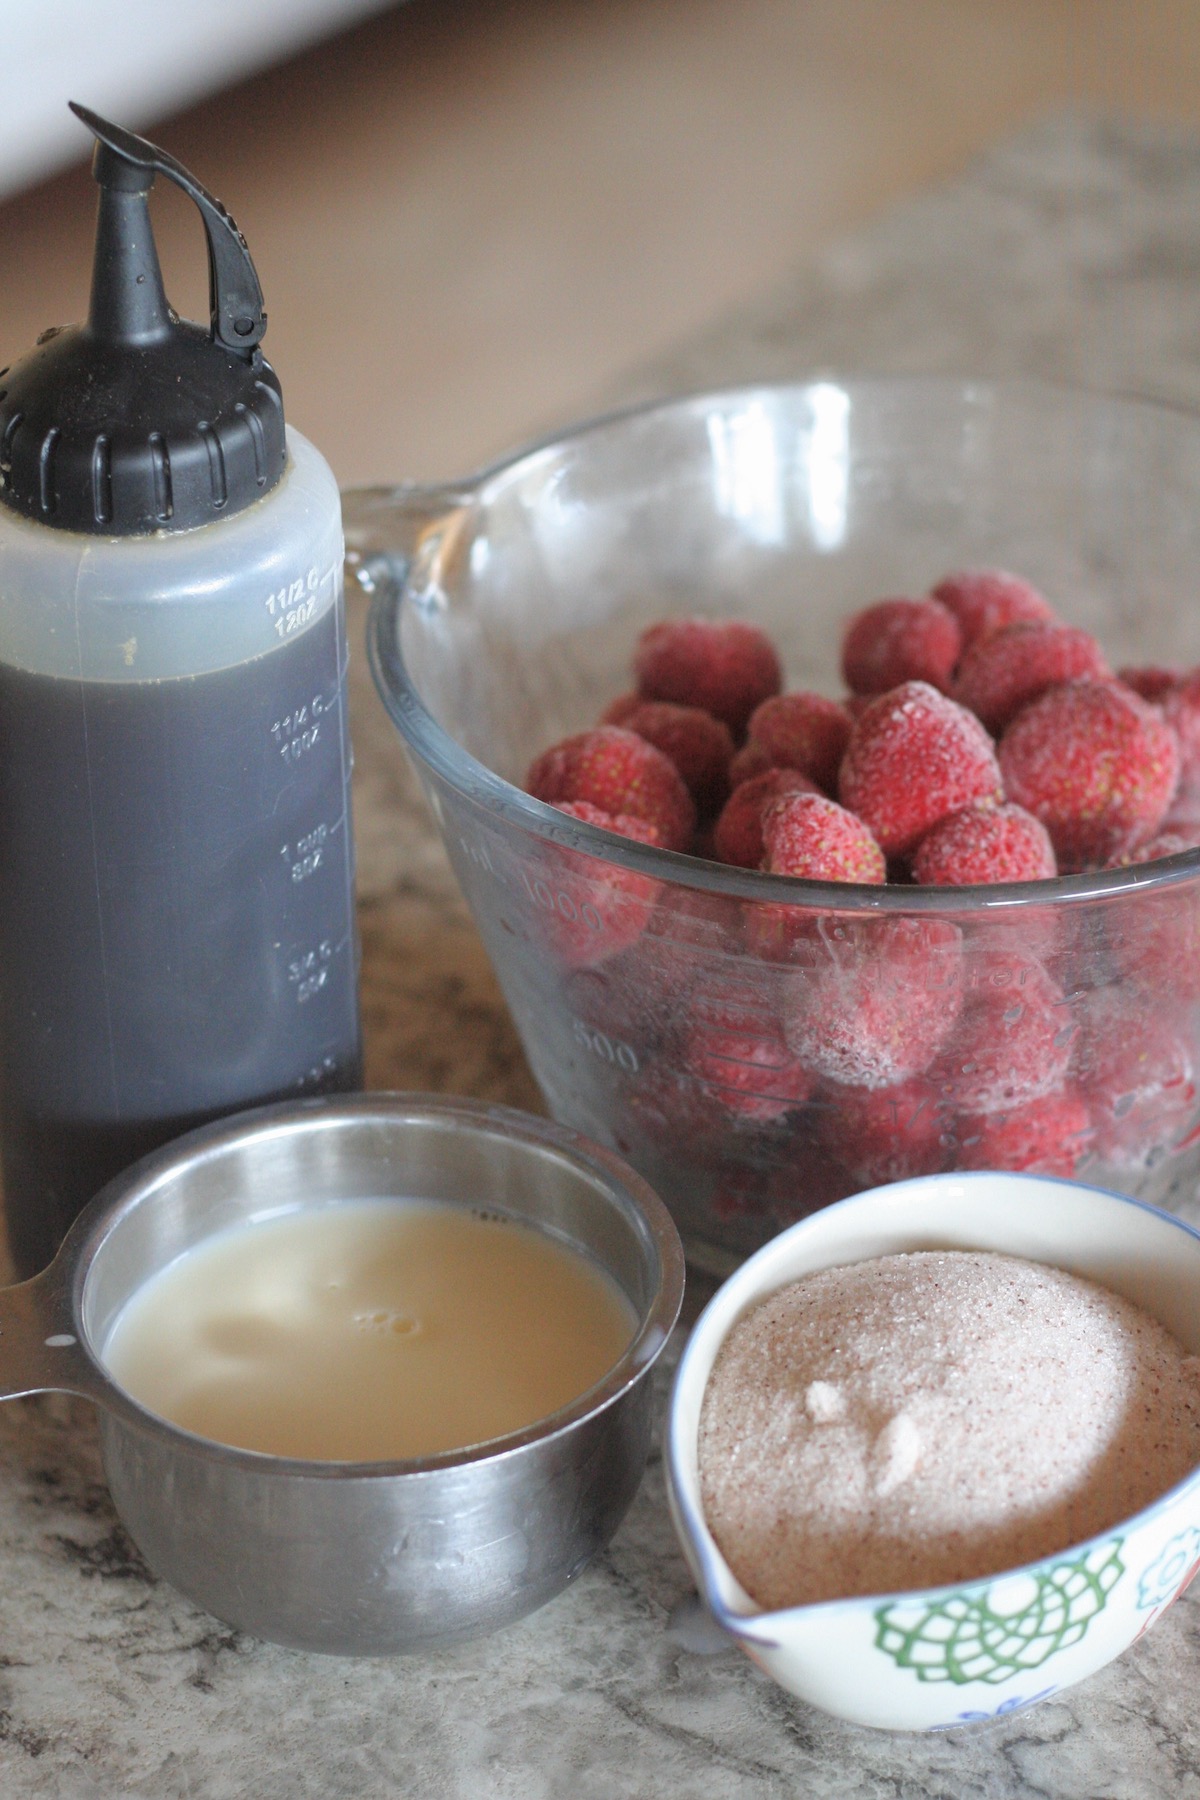 Ingredients to make strawberry soft serve in bowls on a counter.